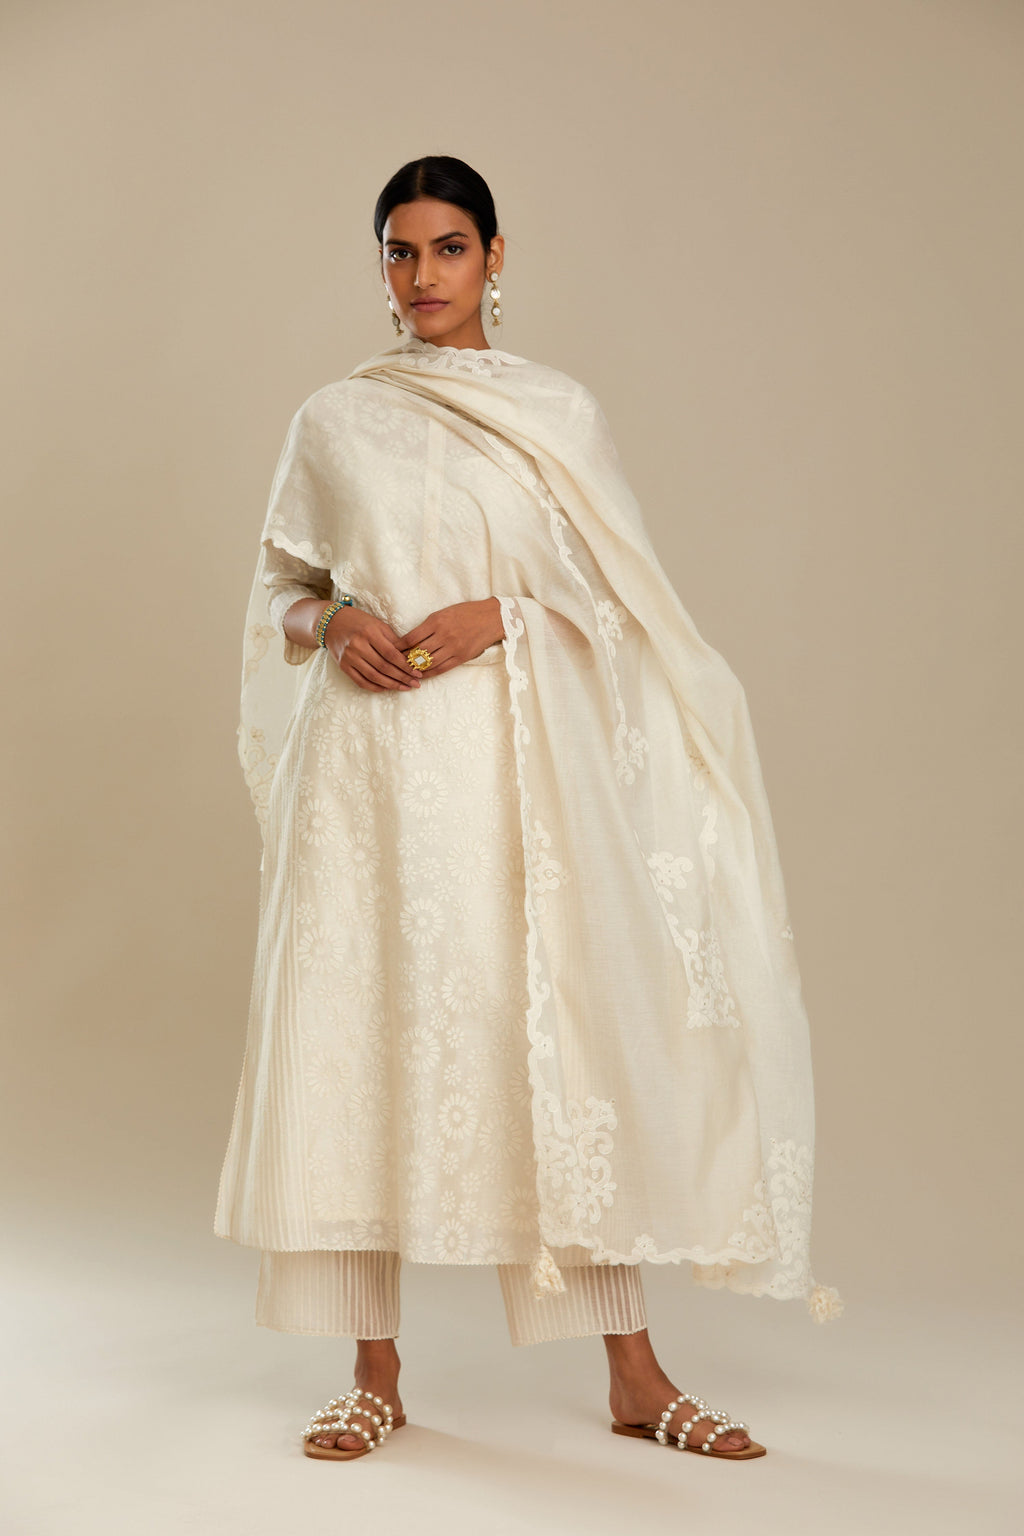 Off white silk chanderi straight kurta set with floral appliqué in center panel and striped cutwork at the sides.